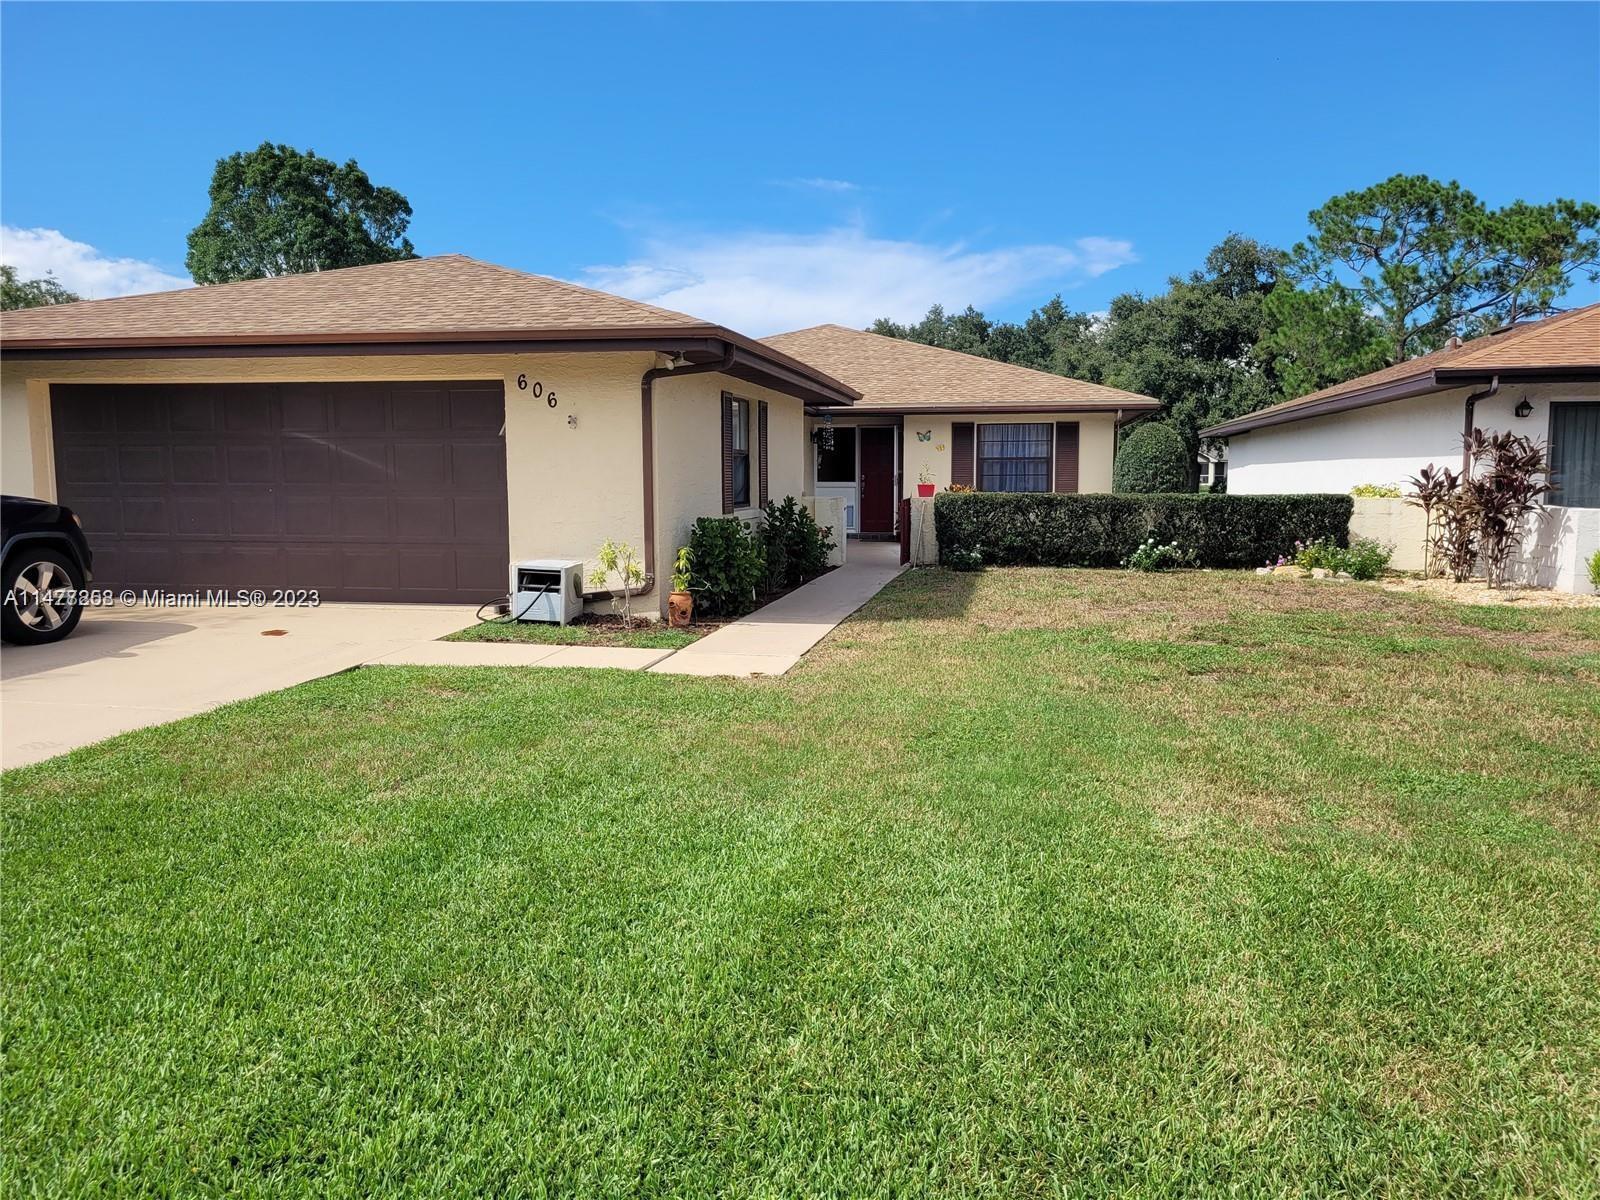 Photo of 606 Turnberry Ct #606 in Winter Haven, FL